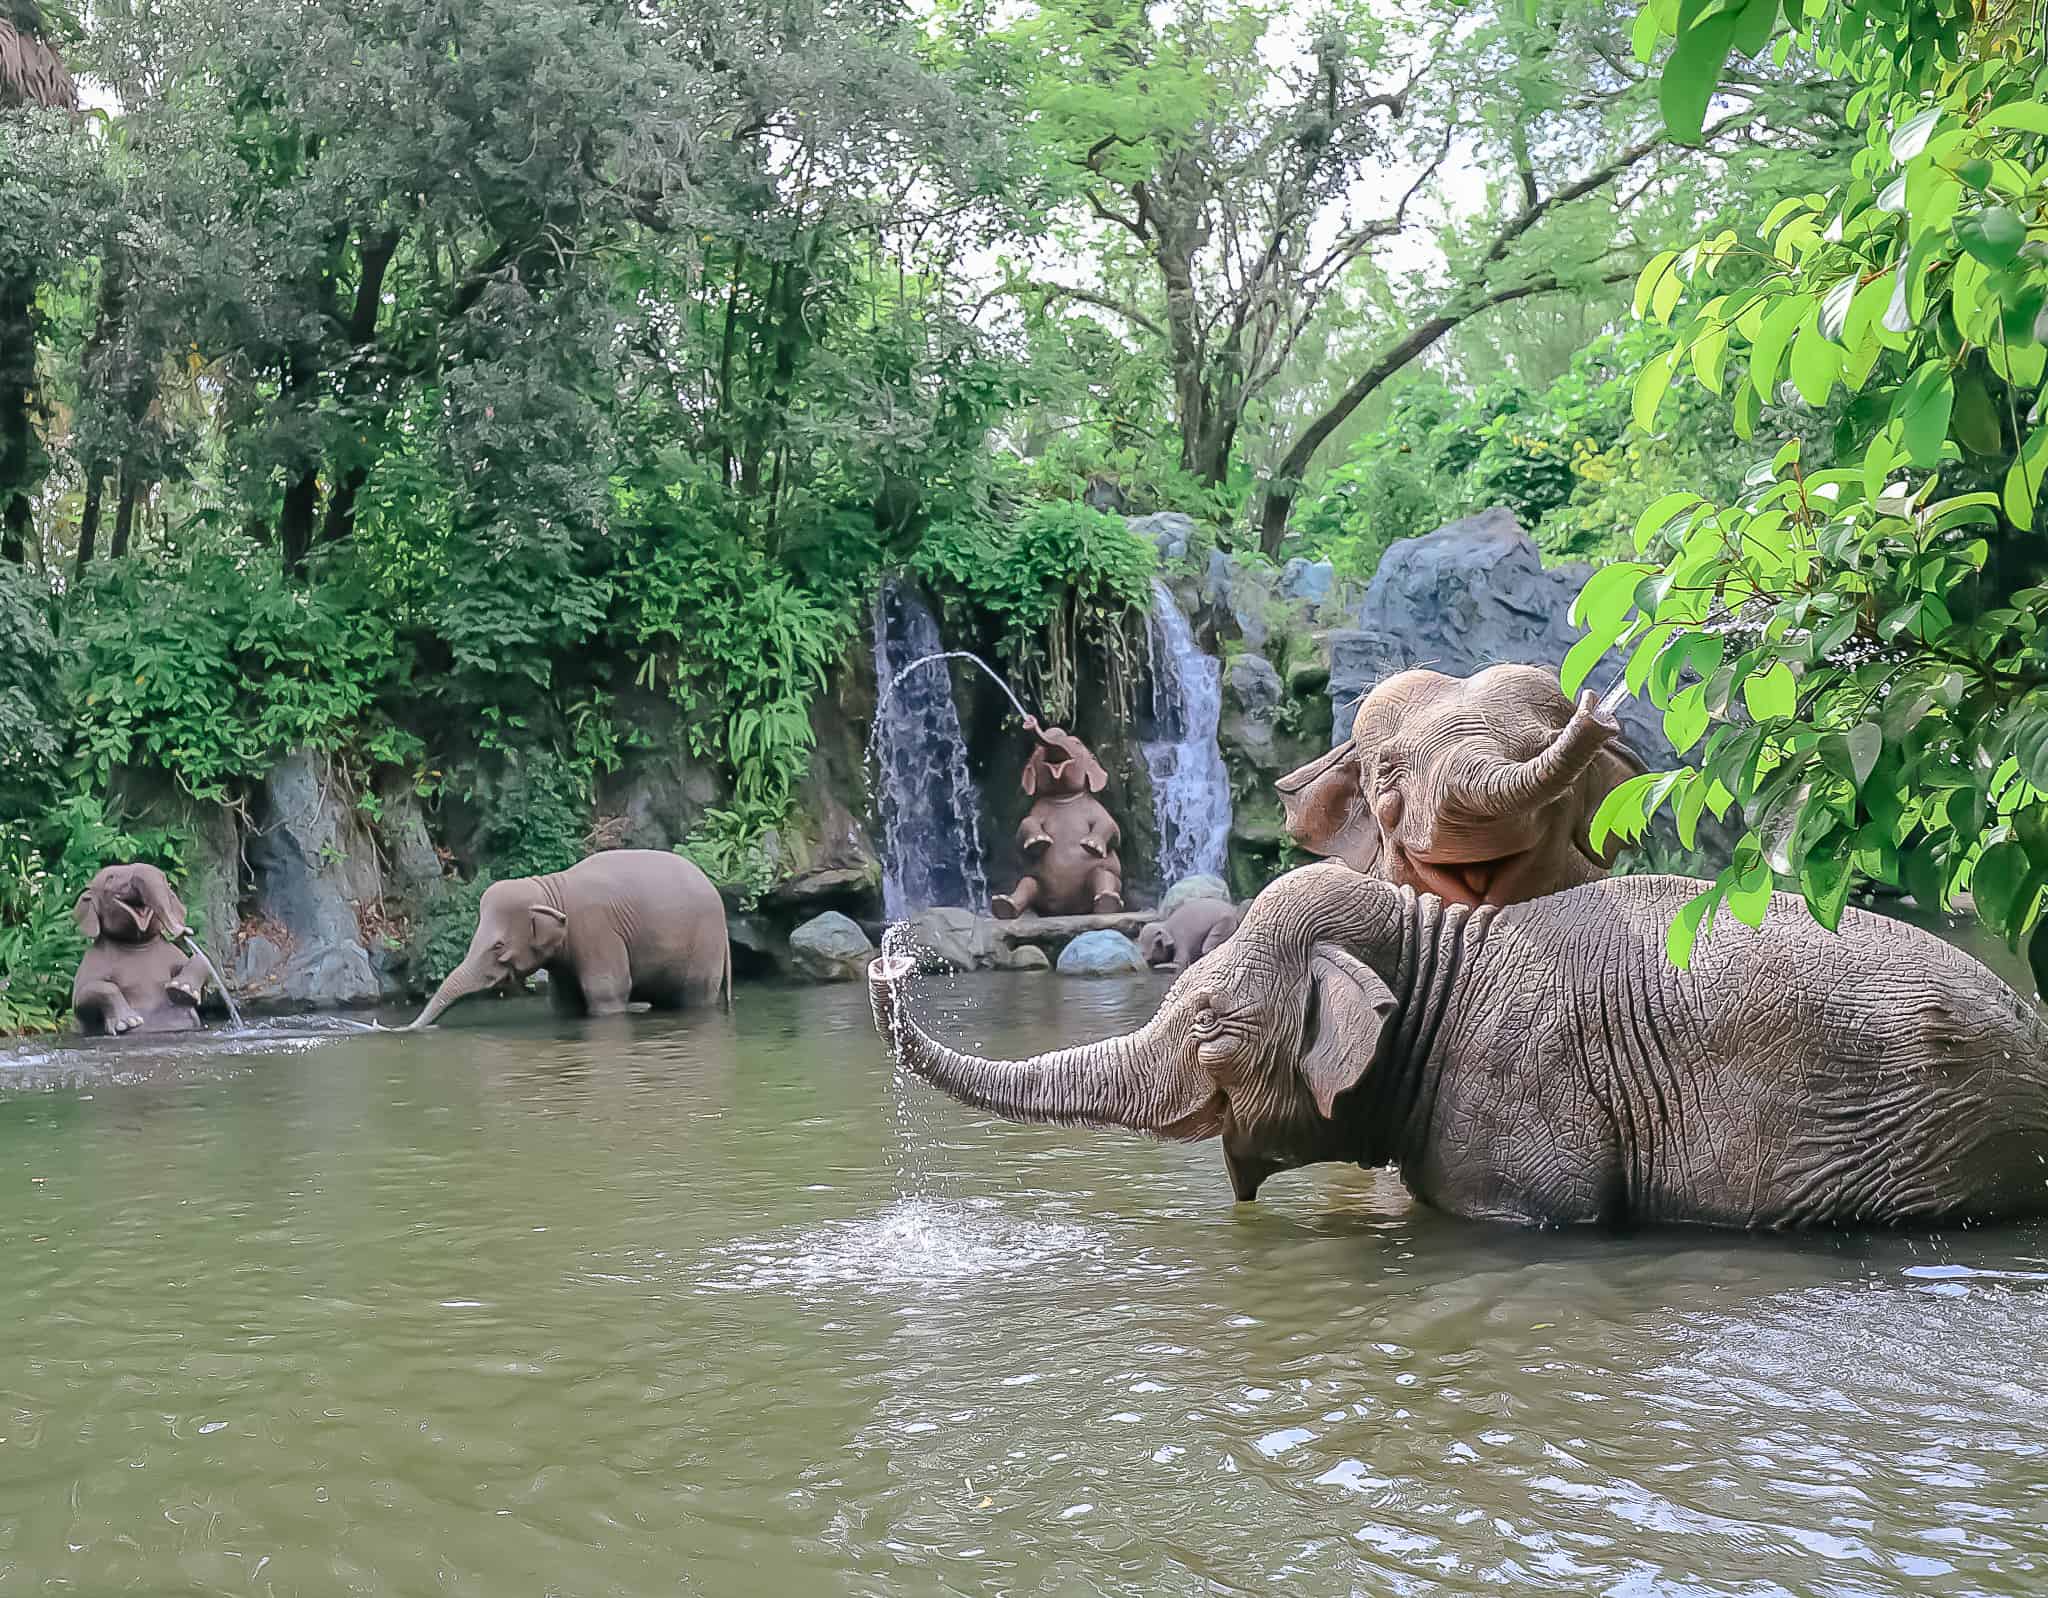 several animatronic elephants playing in the water of the Jungle Cruise